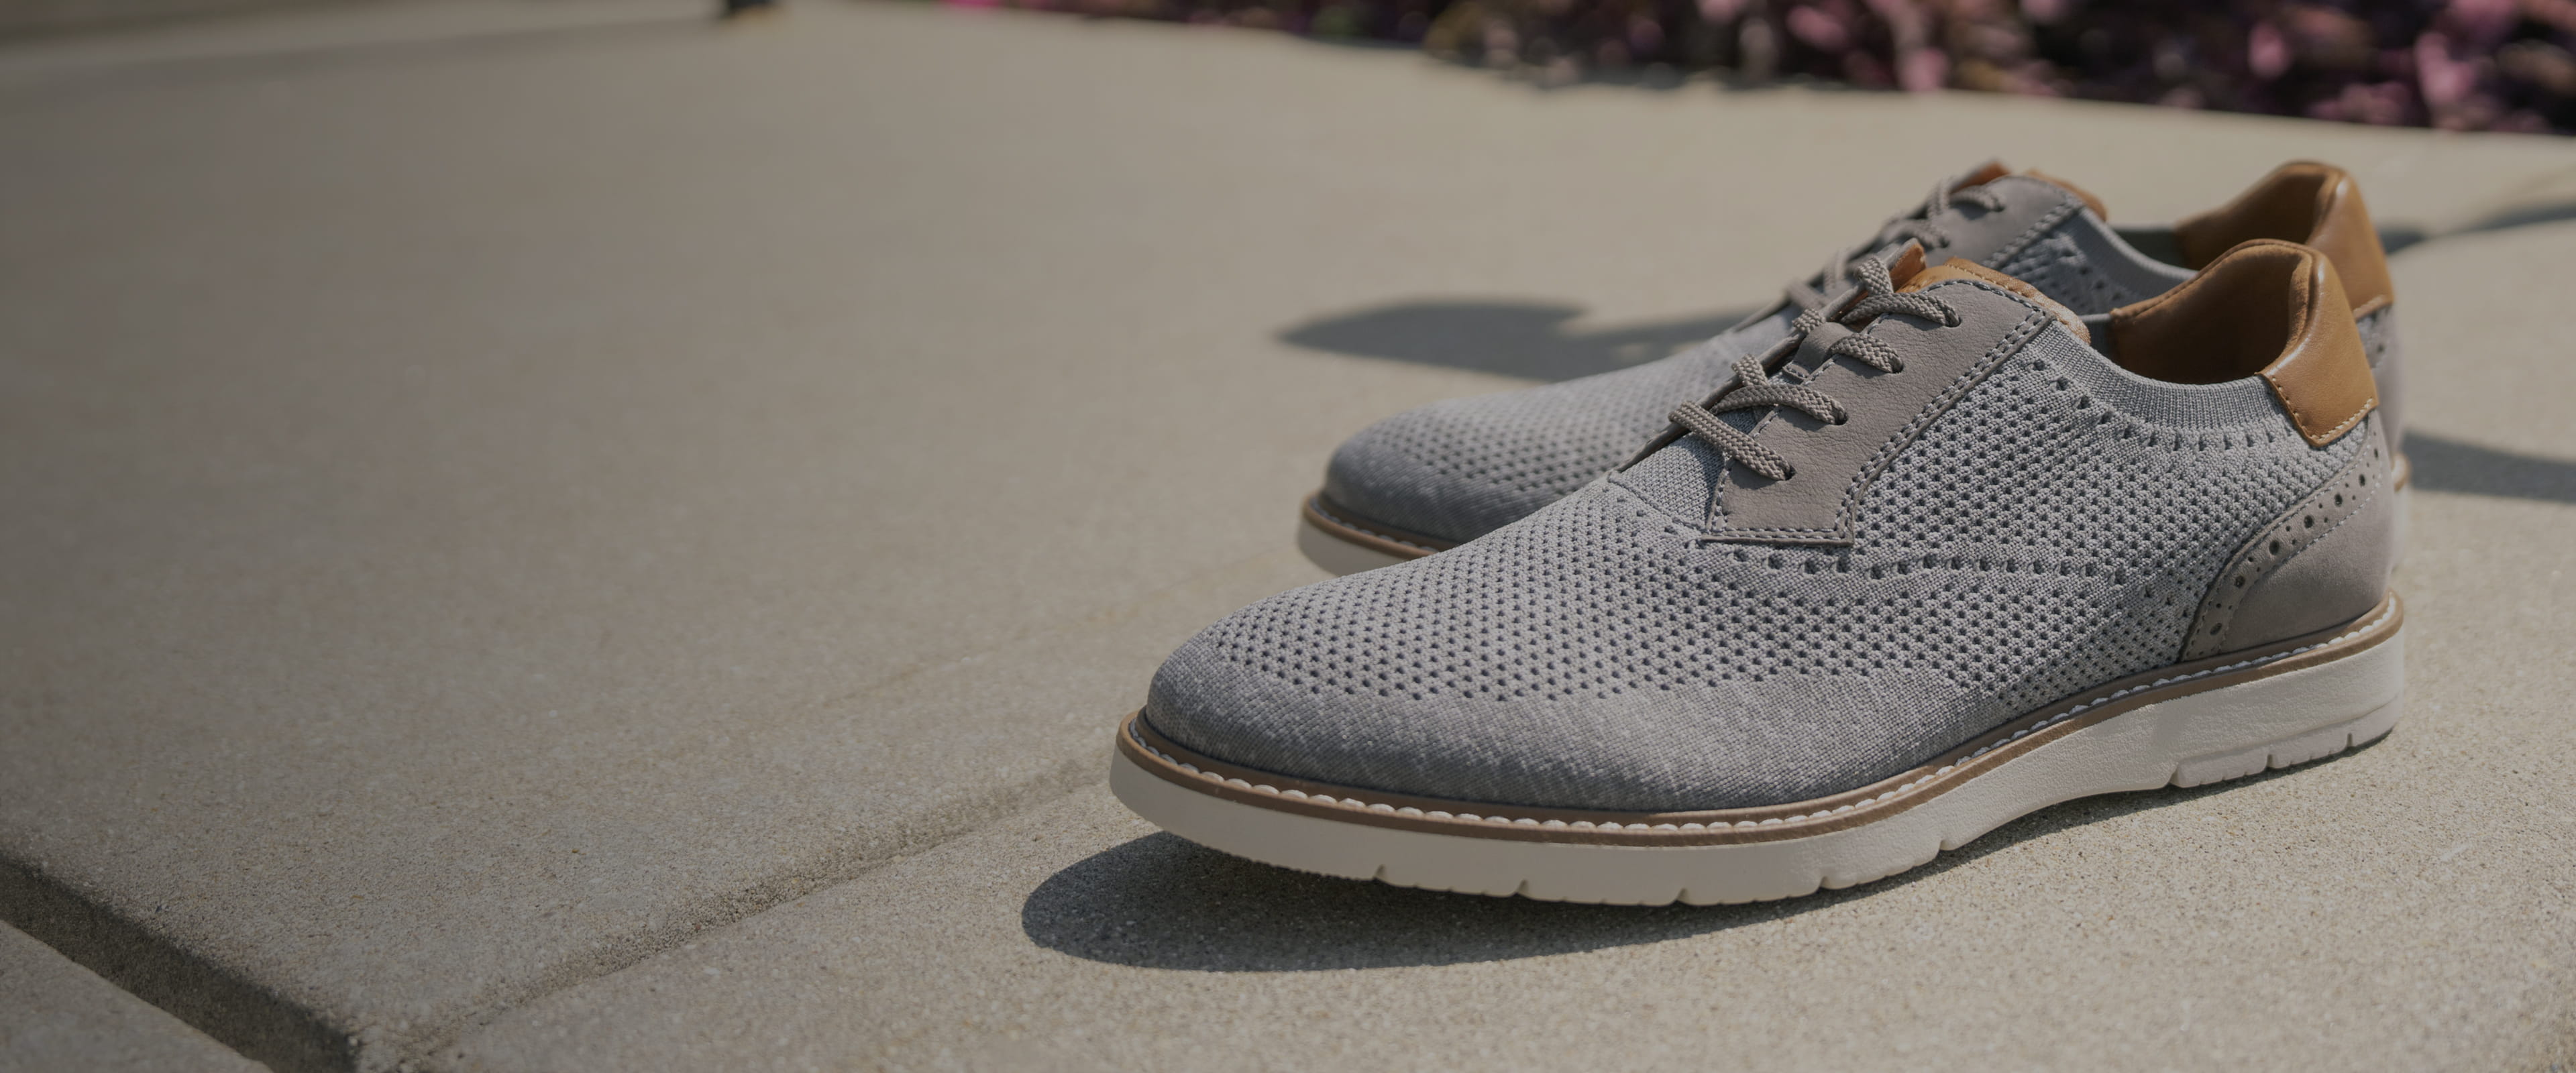 Florsheim view all featuring the Vibe Knit in grey on a sidewalk.